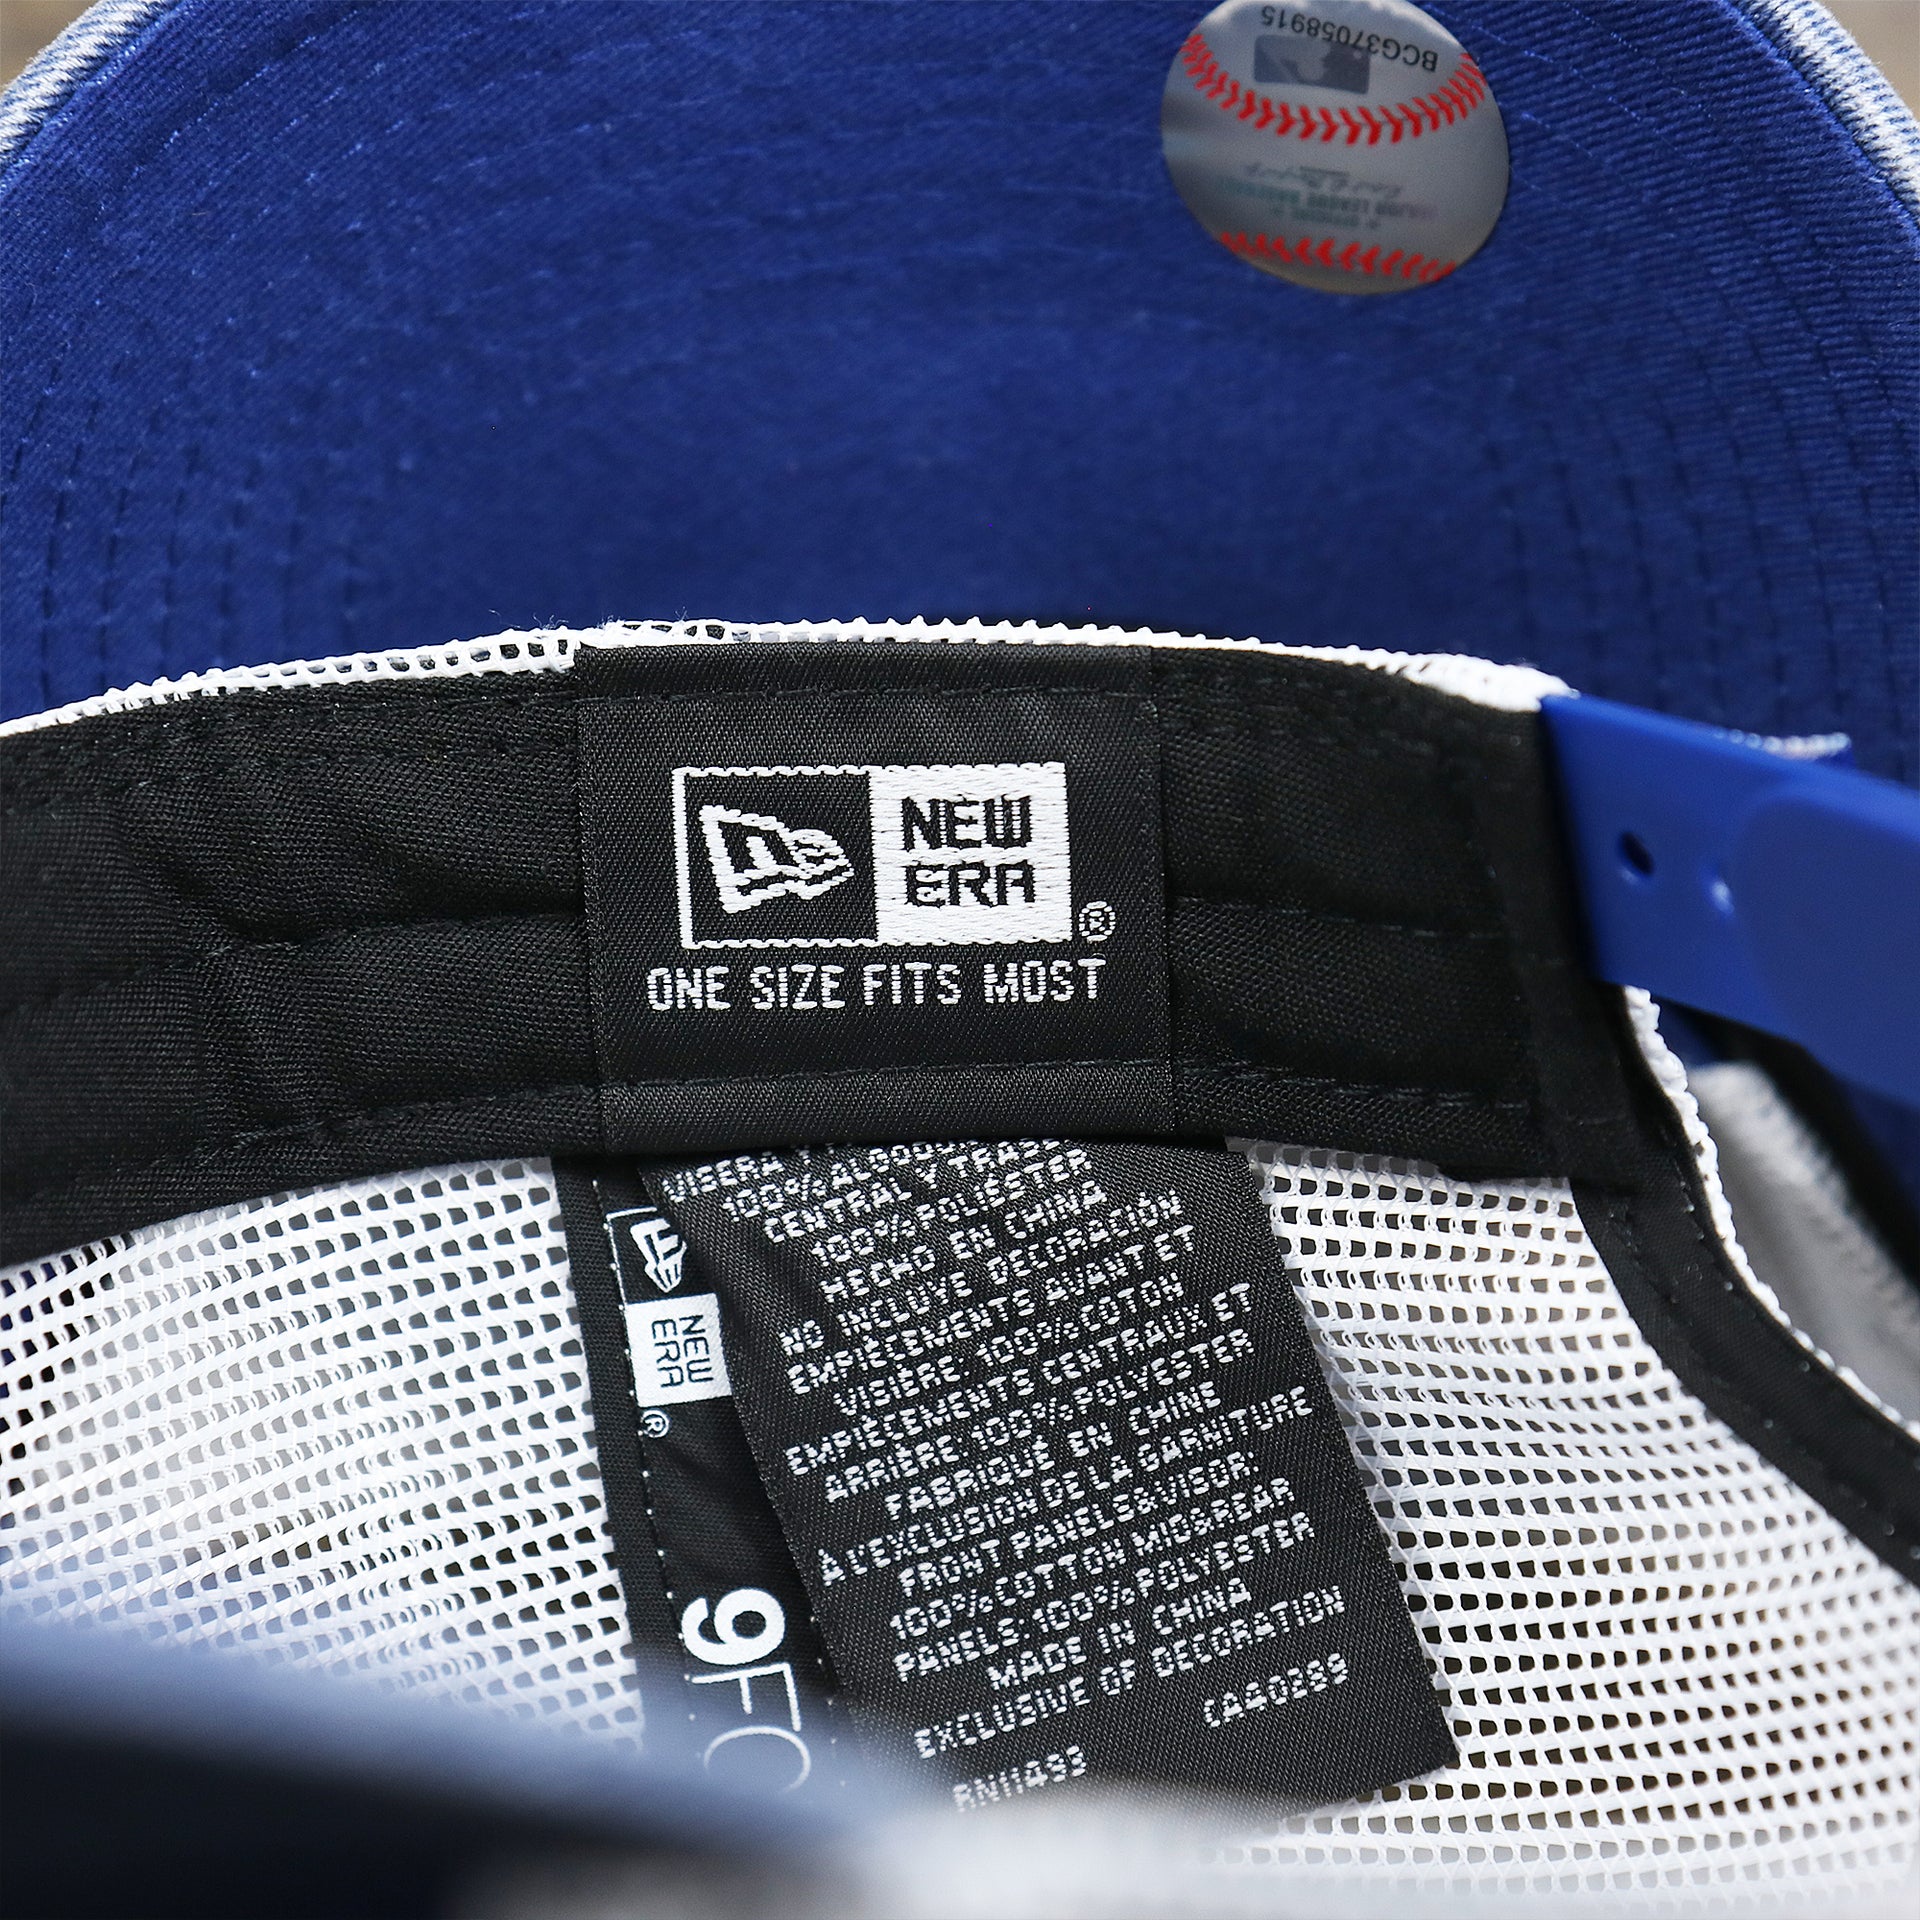 The New Era Tag on the Cooperstown Montreal Expos 1969s Logo Worn Colorway Mesh Back 9Forty Dad Hat | Royal Blue 9Forty Hat